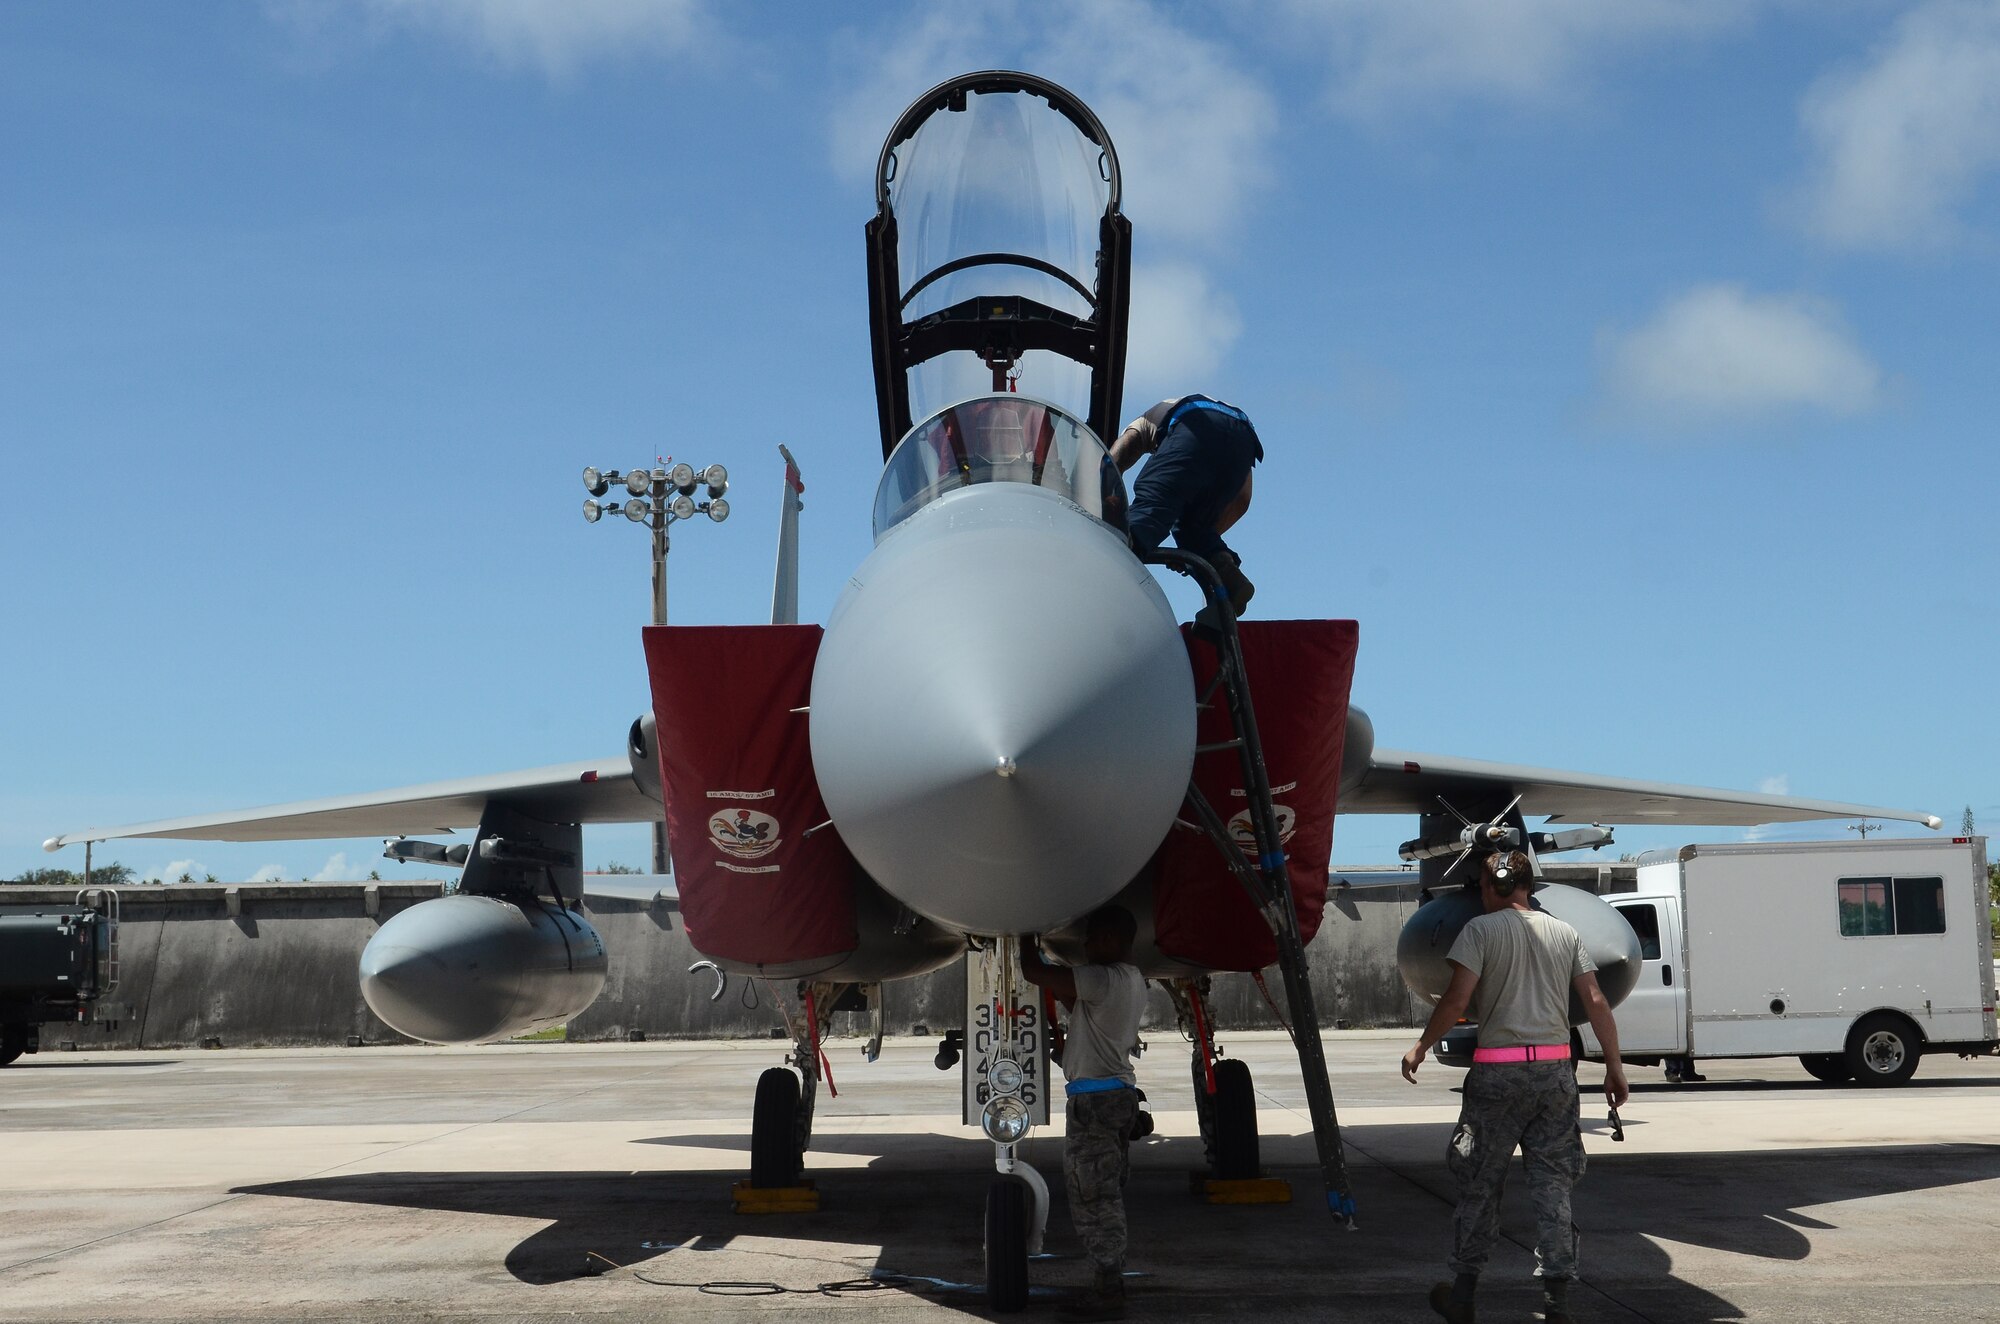 Airmen of the 44th Aircraft Maintenance Unit assigned to Kadena Air Base, Japan inspect an F-15C Eagle after a training mission June 27, 2014, on Andersen Air Force Base, Guam. The Airmen, aircraft and equipment came to Andersen to take part in an aviation training relocation program, which is an opportunity for Kadena Airmen to improve their skillsets in a location with less noise restrictions. (U.S. Air Force photo by Airman 1st Class Emily A. Bradley/Released)